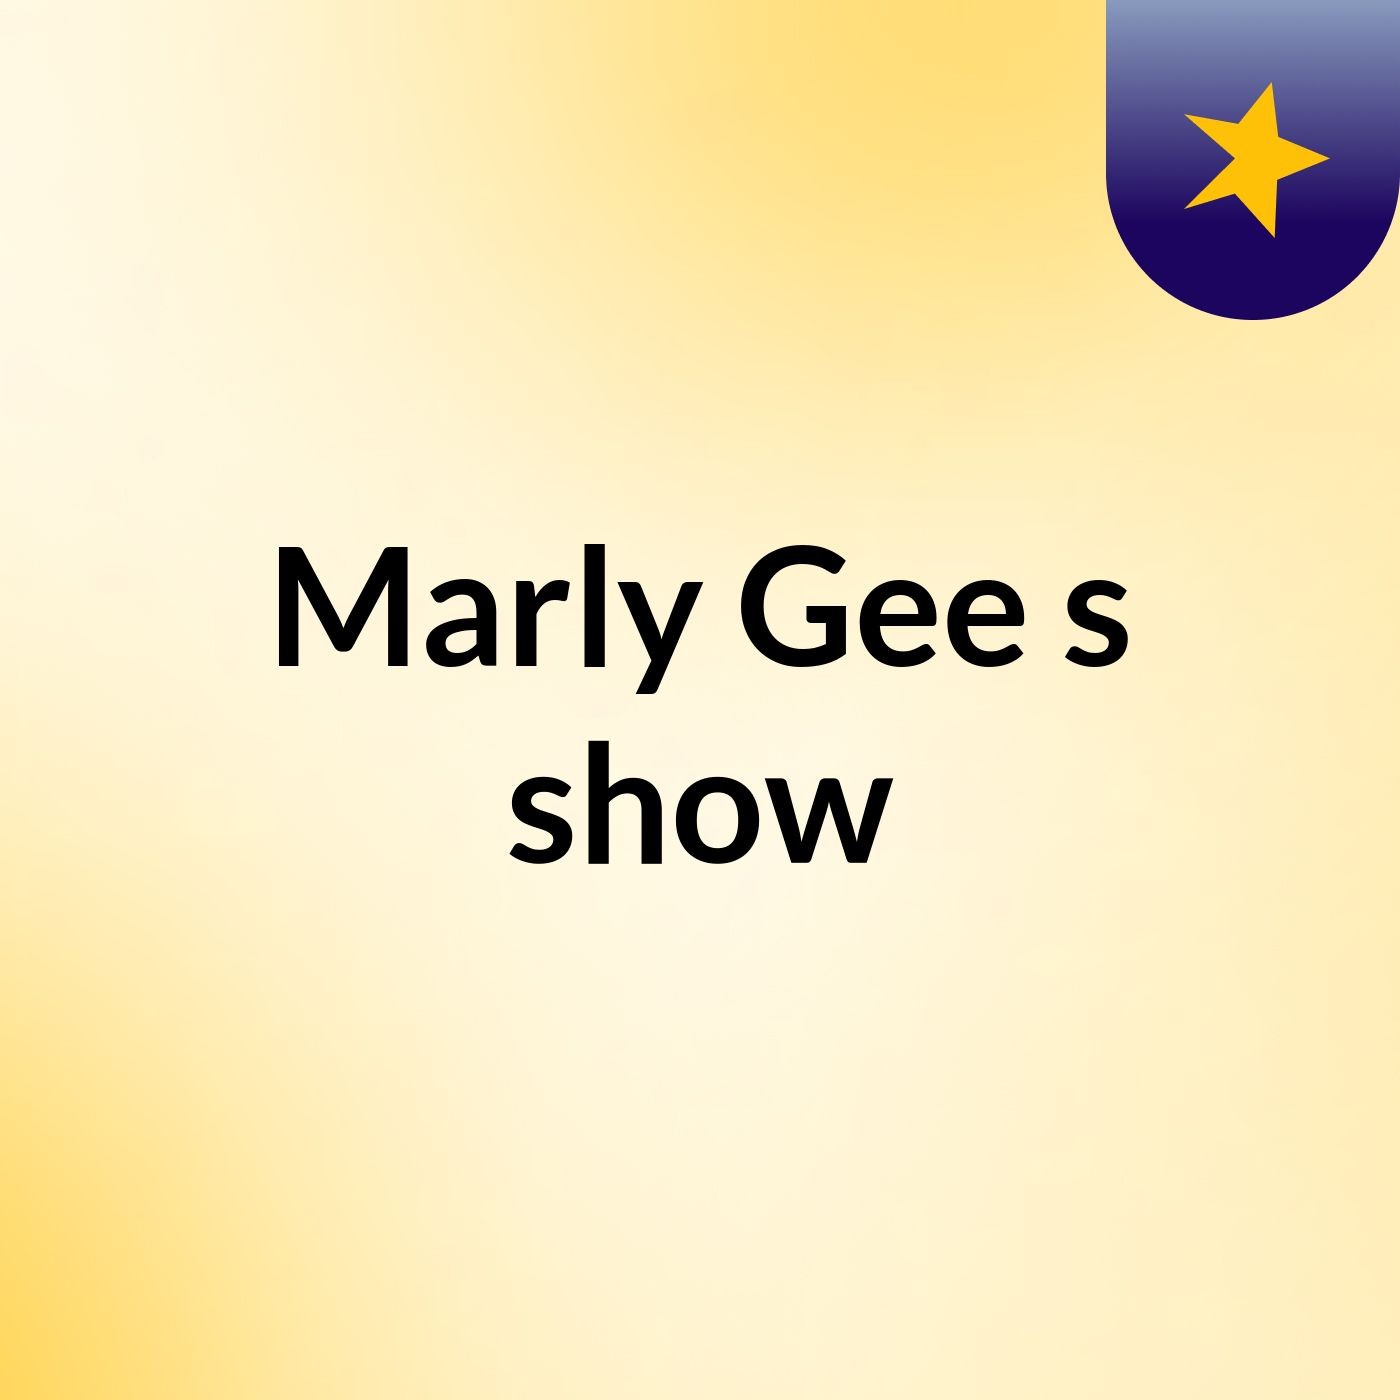 Marly Gee's show